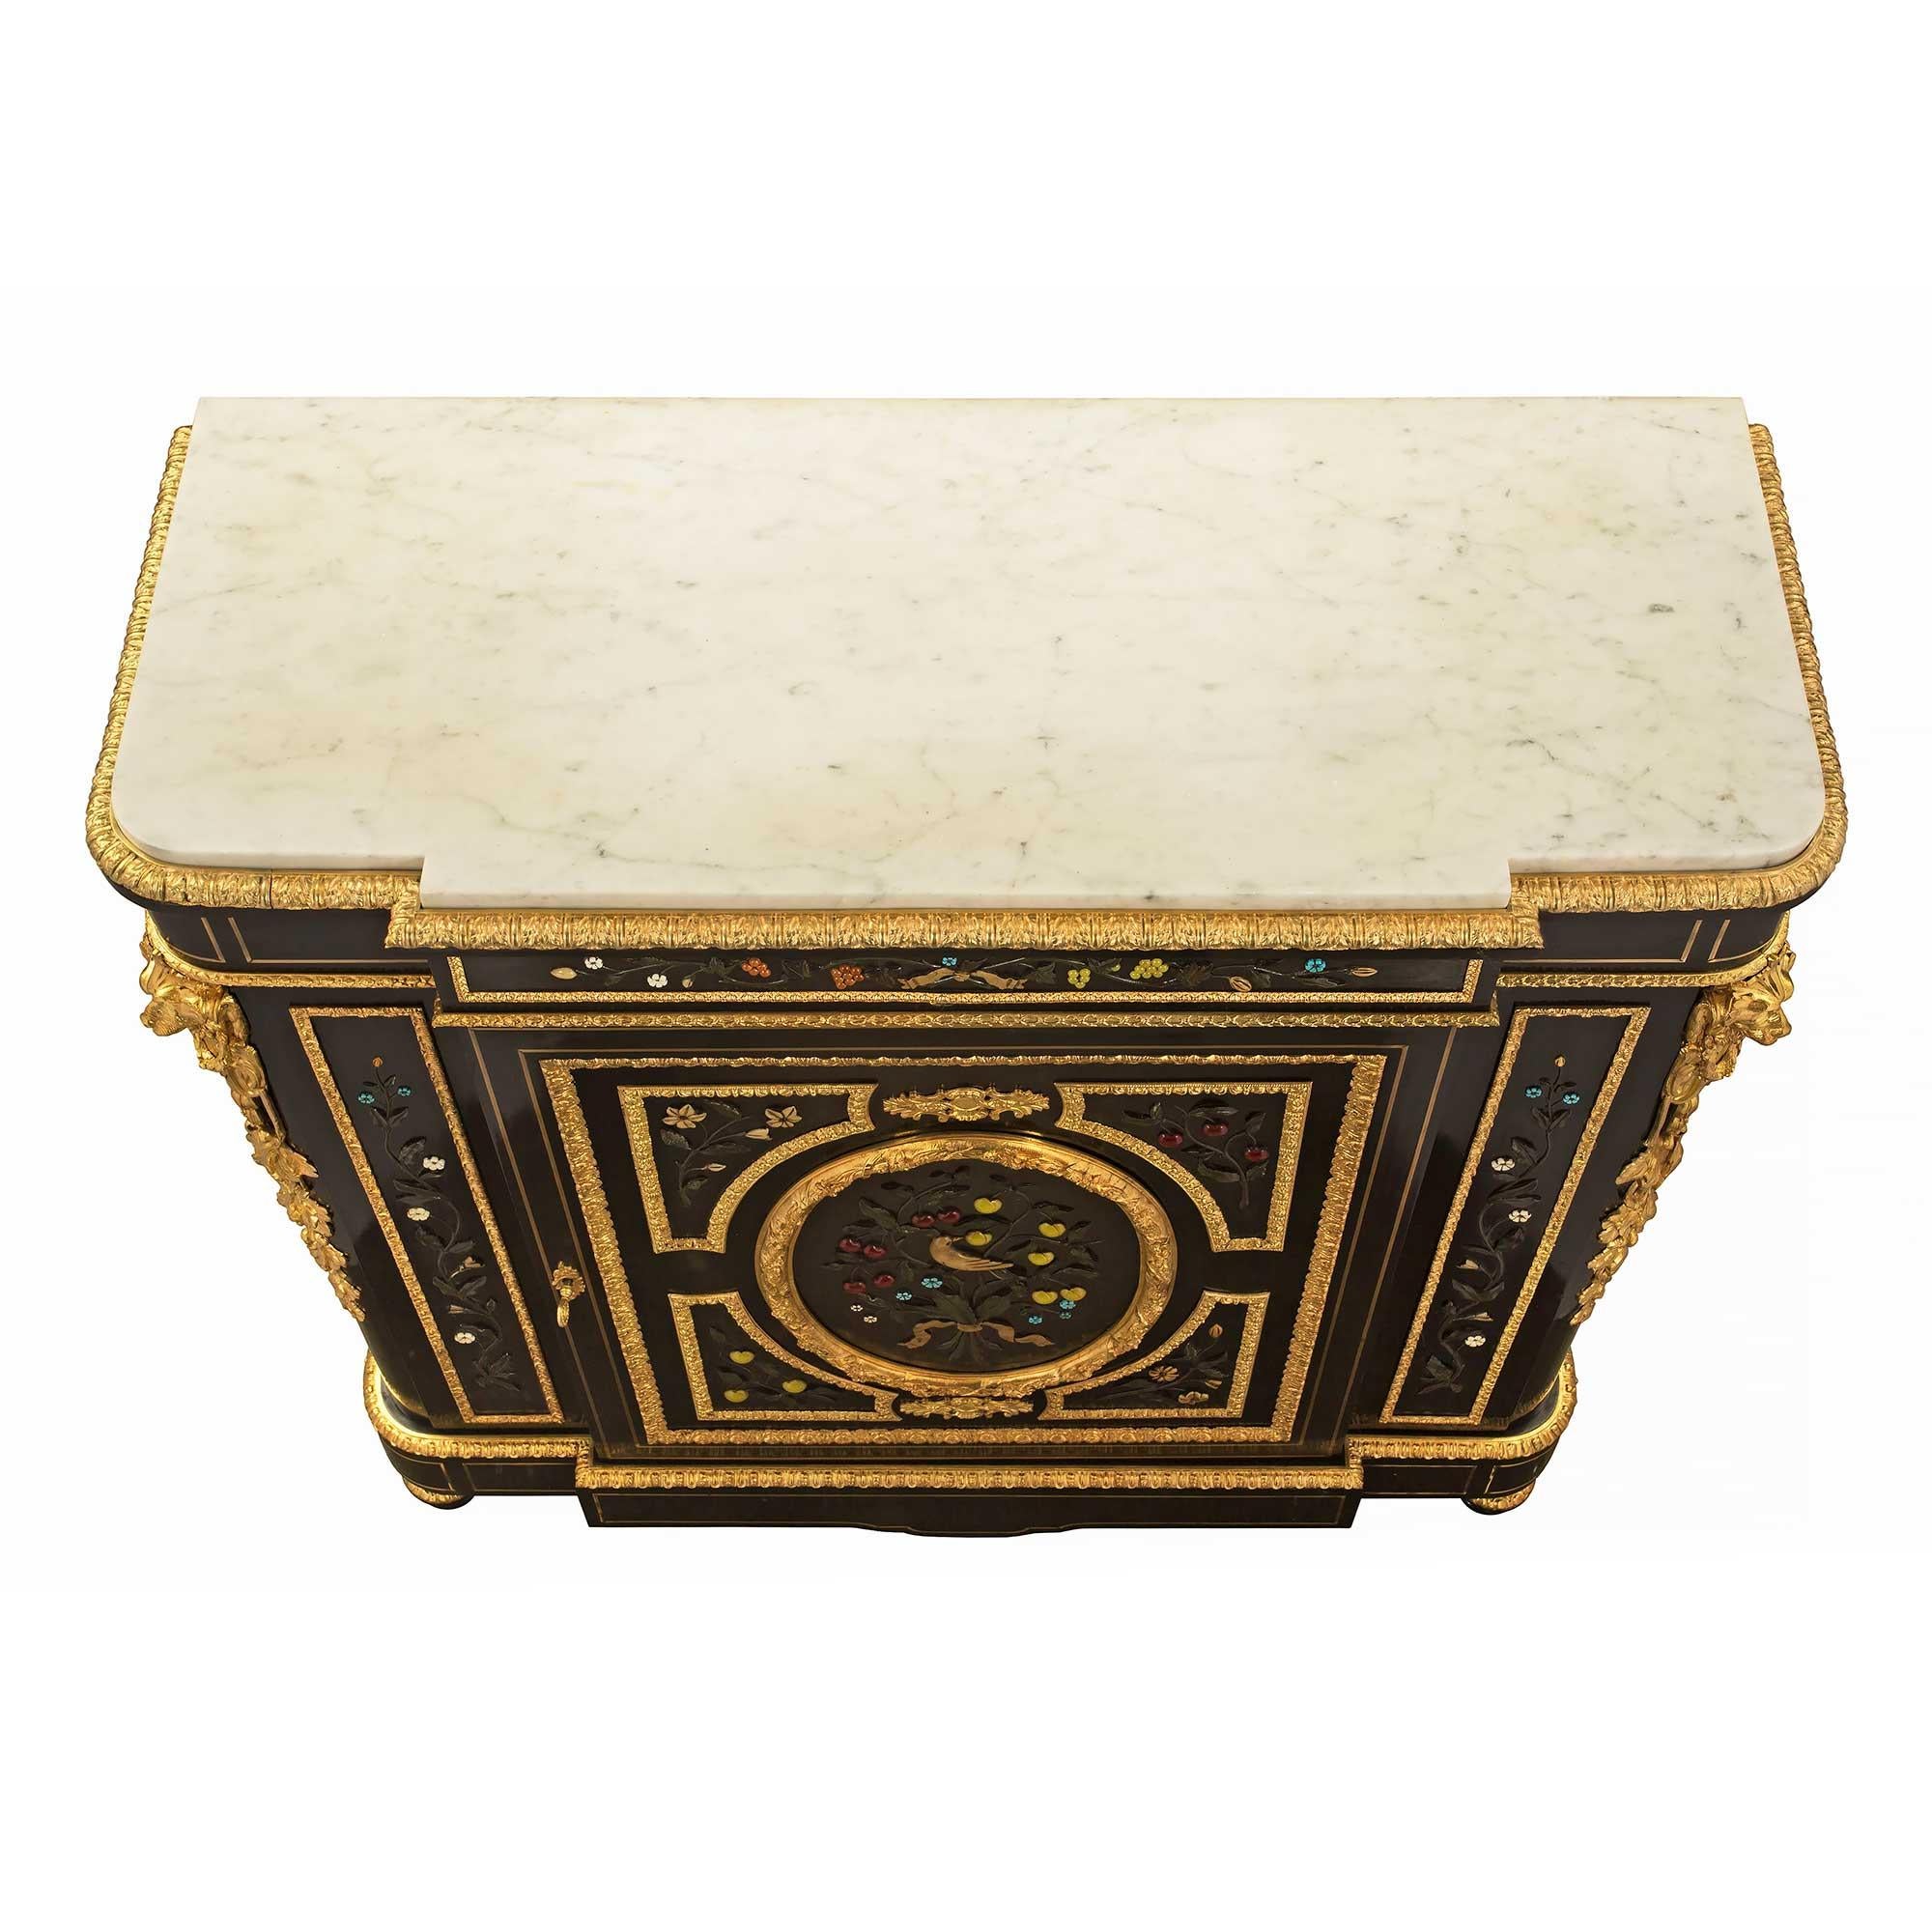 A sensational French 19th century Napoleon III period ebony, brass, ormolu, semi precious stone and marble cabinet. The cabinet is raised by mottled topie shaped feet with a fine wrap around ormolu band. The bottom frieze displays a most elegant